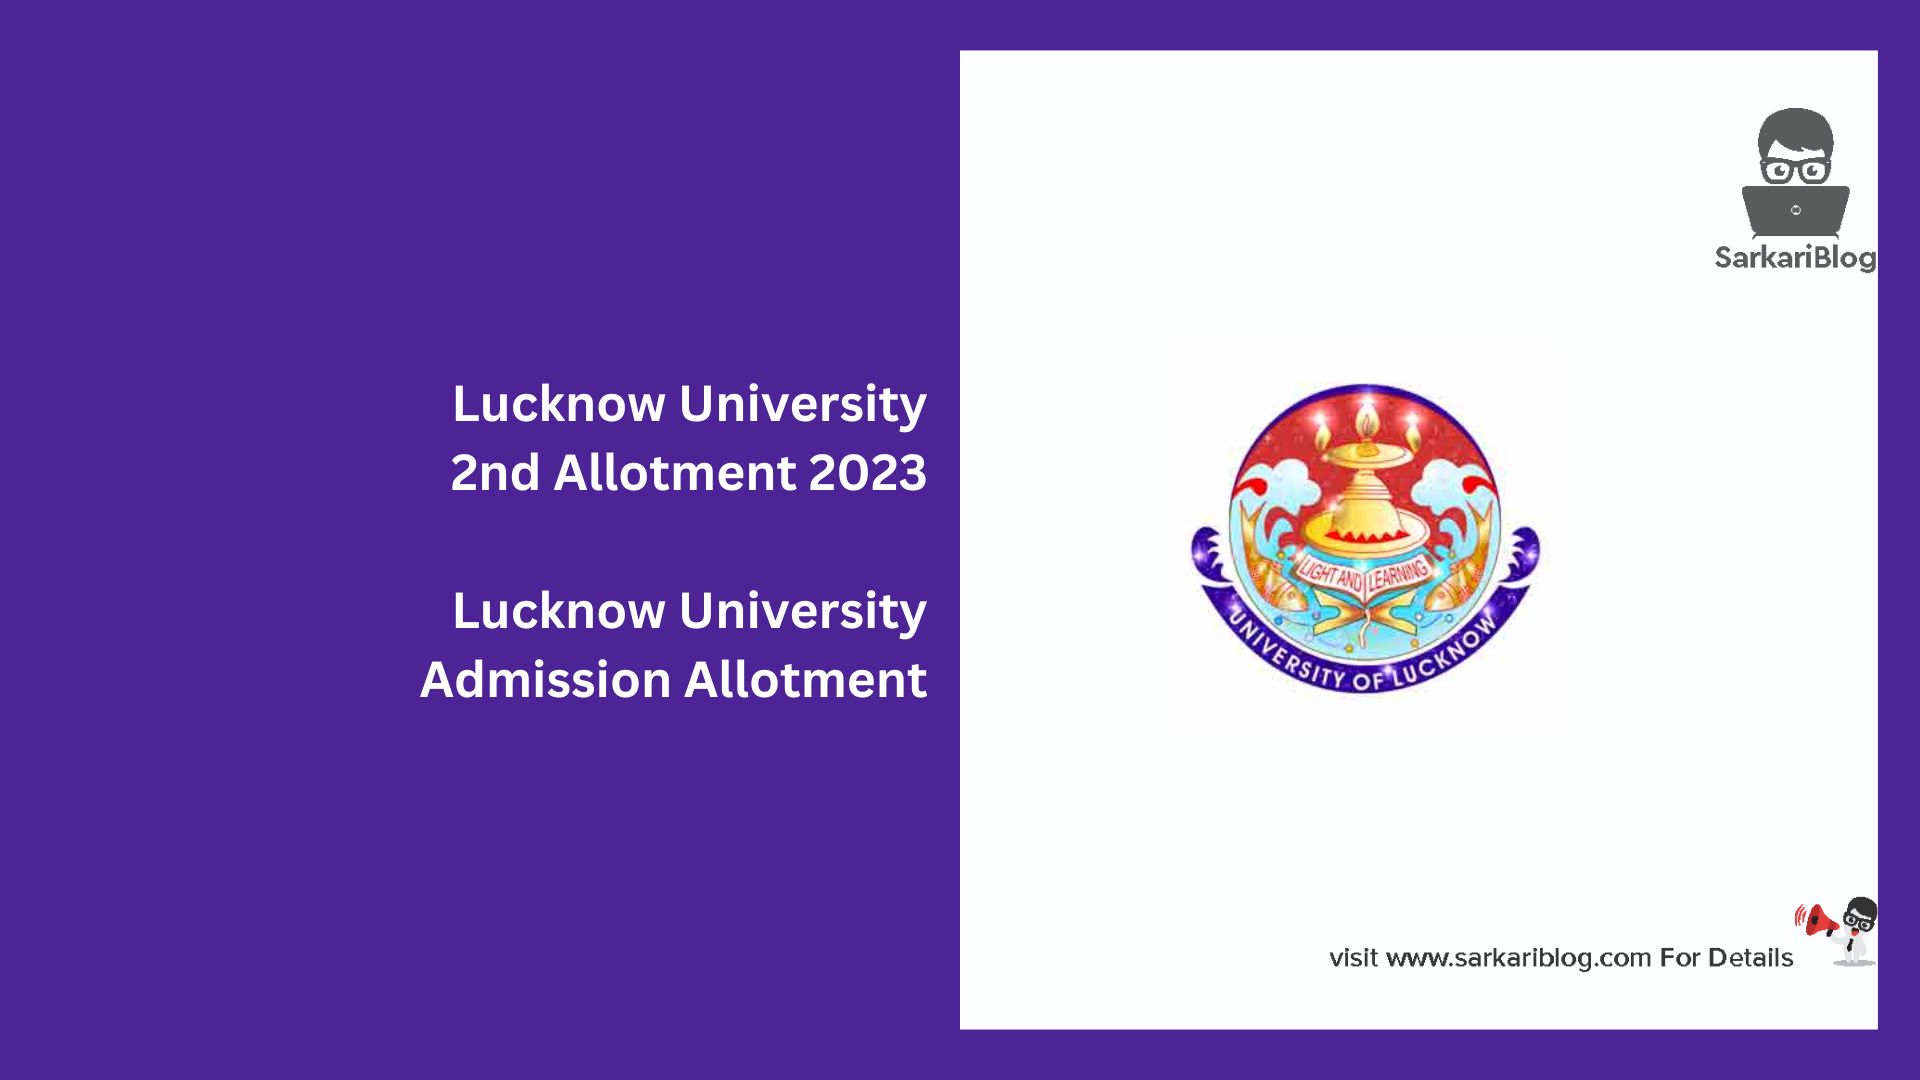 Lucknow University 2nd Allotment 2023